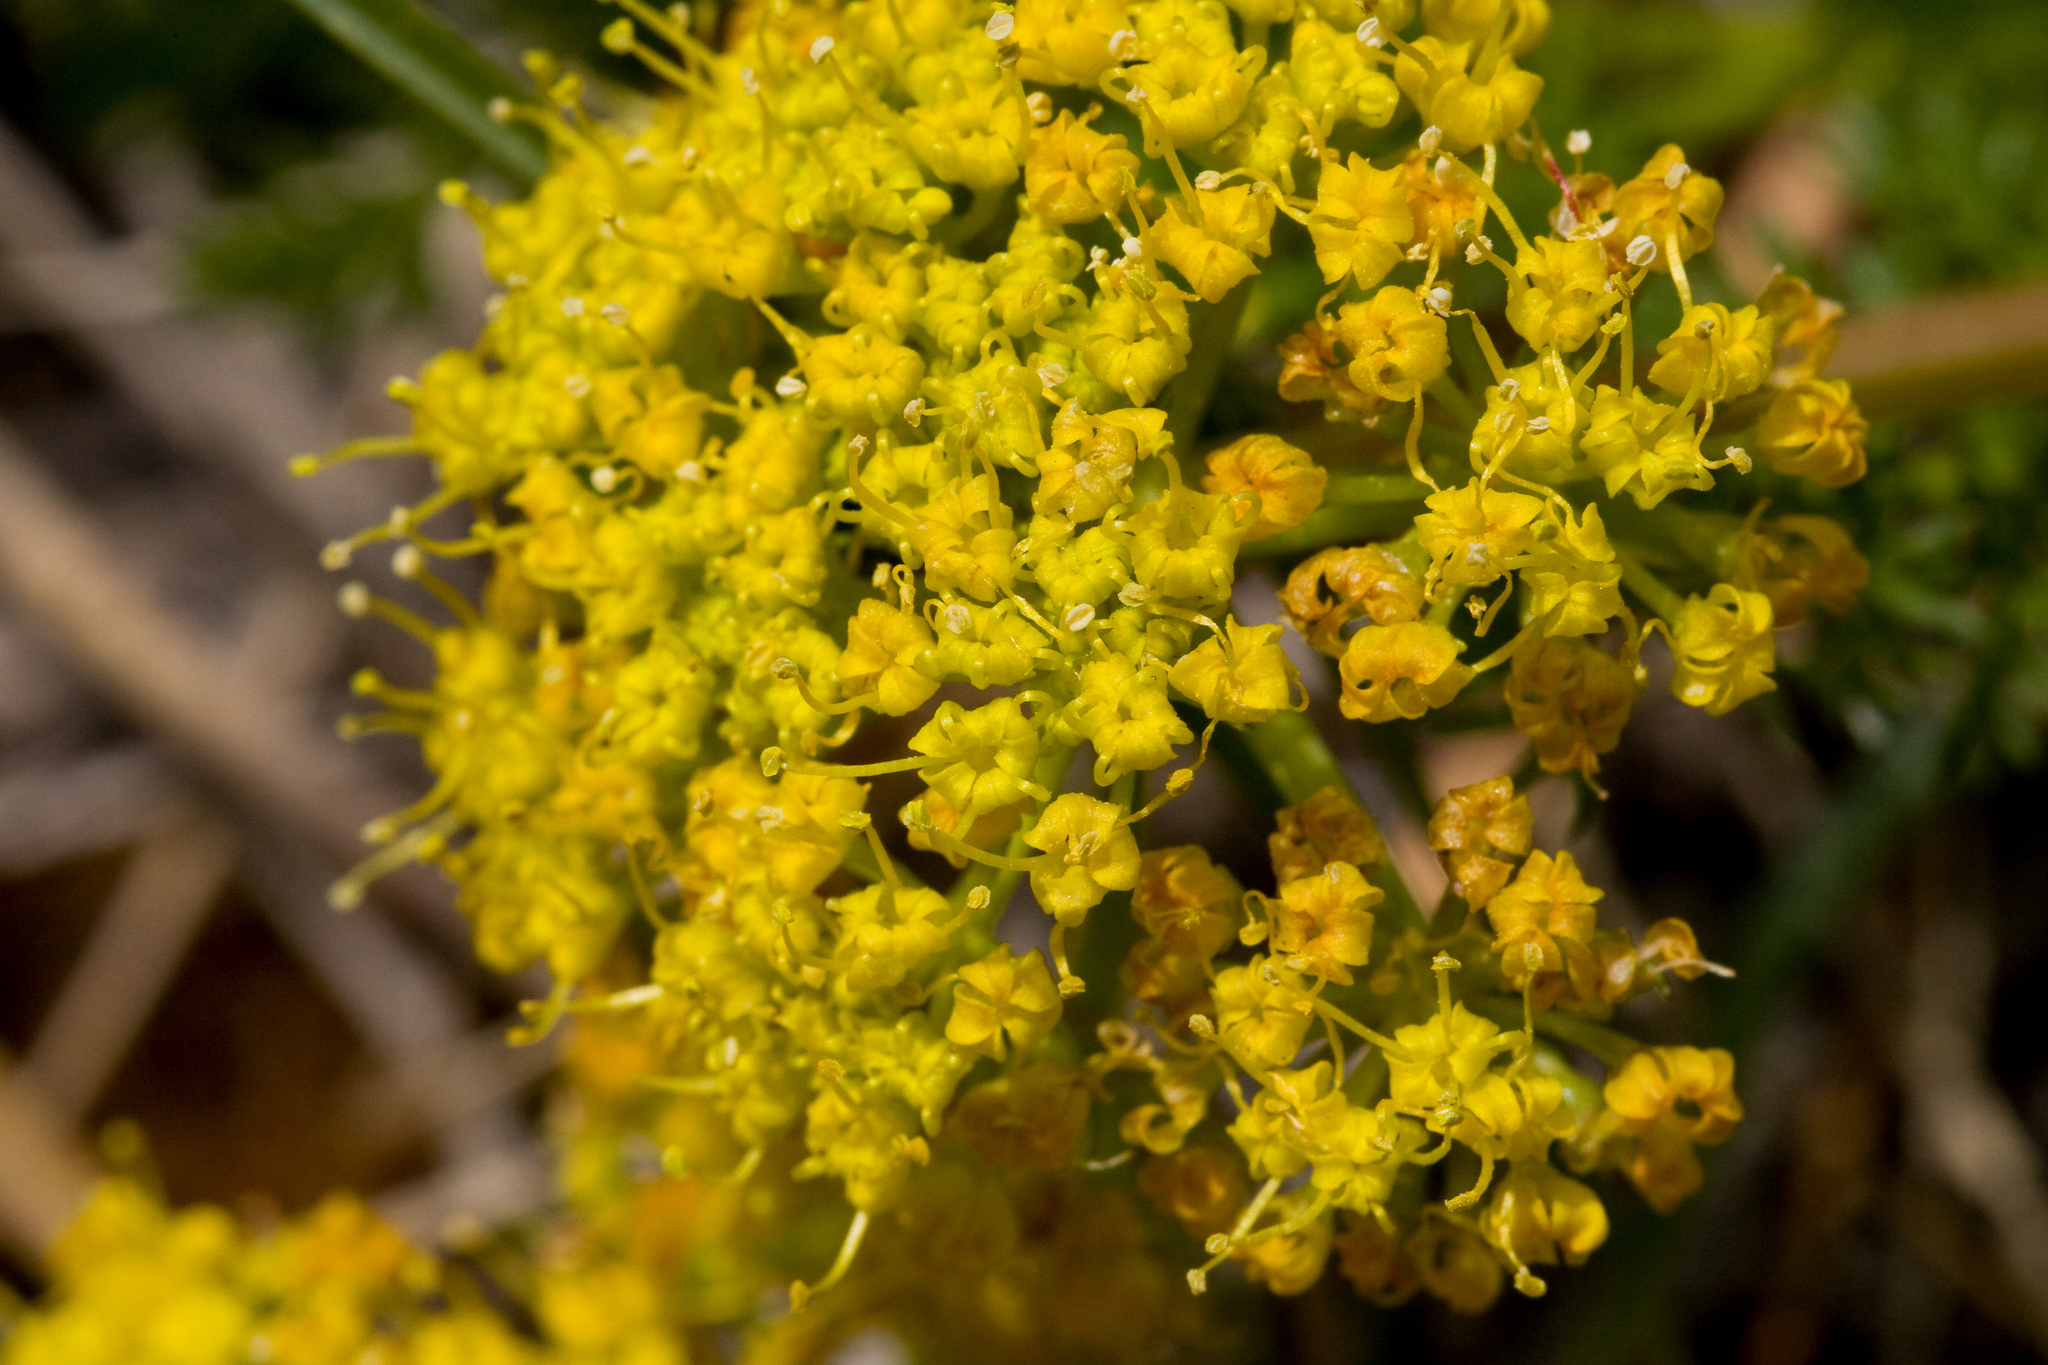 Dense cluster of yellow flowers in an umbel